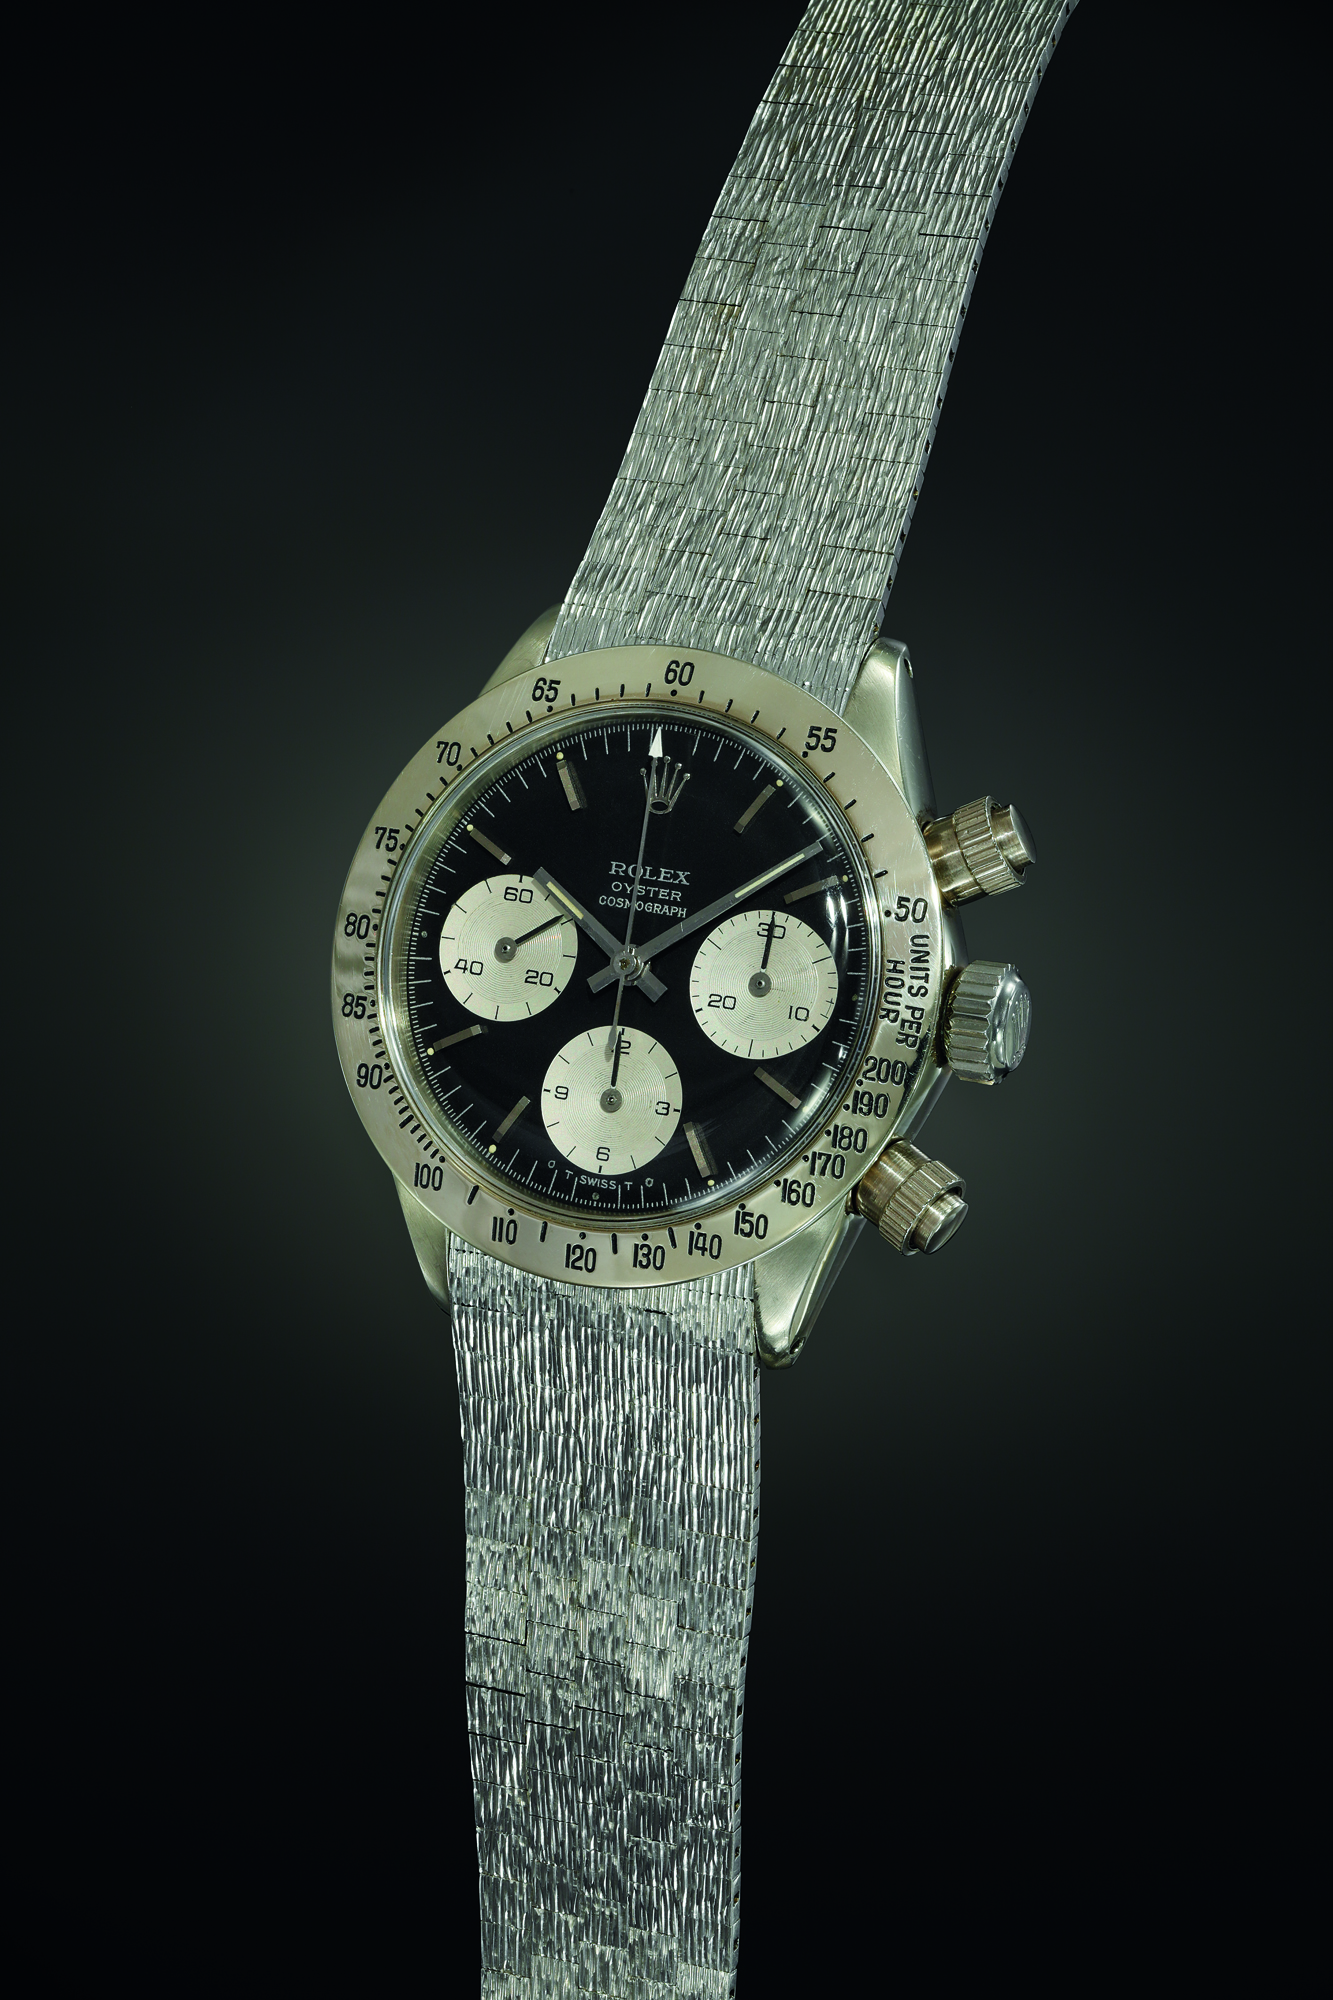 Achieved the second highest price for a Rolex wristwatch at an auction. It's a historically important and exceedingly attractive white gold chronograph wristwatch with black dial and bark finished bracelet, the only one known of its kind. Amount realised CHF 5,937,500.